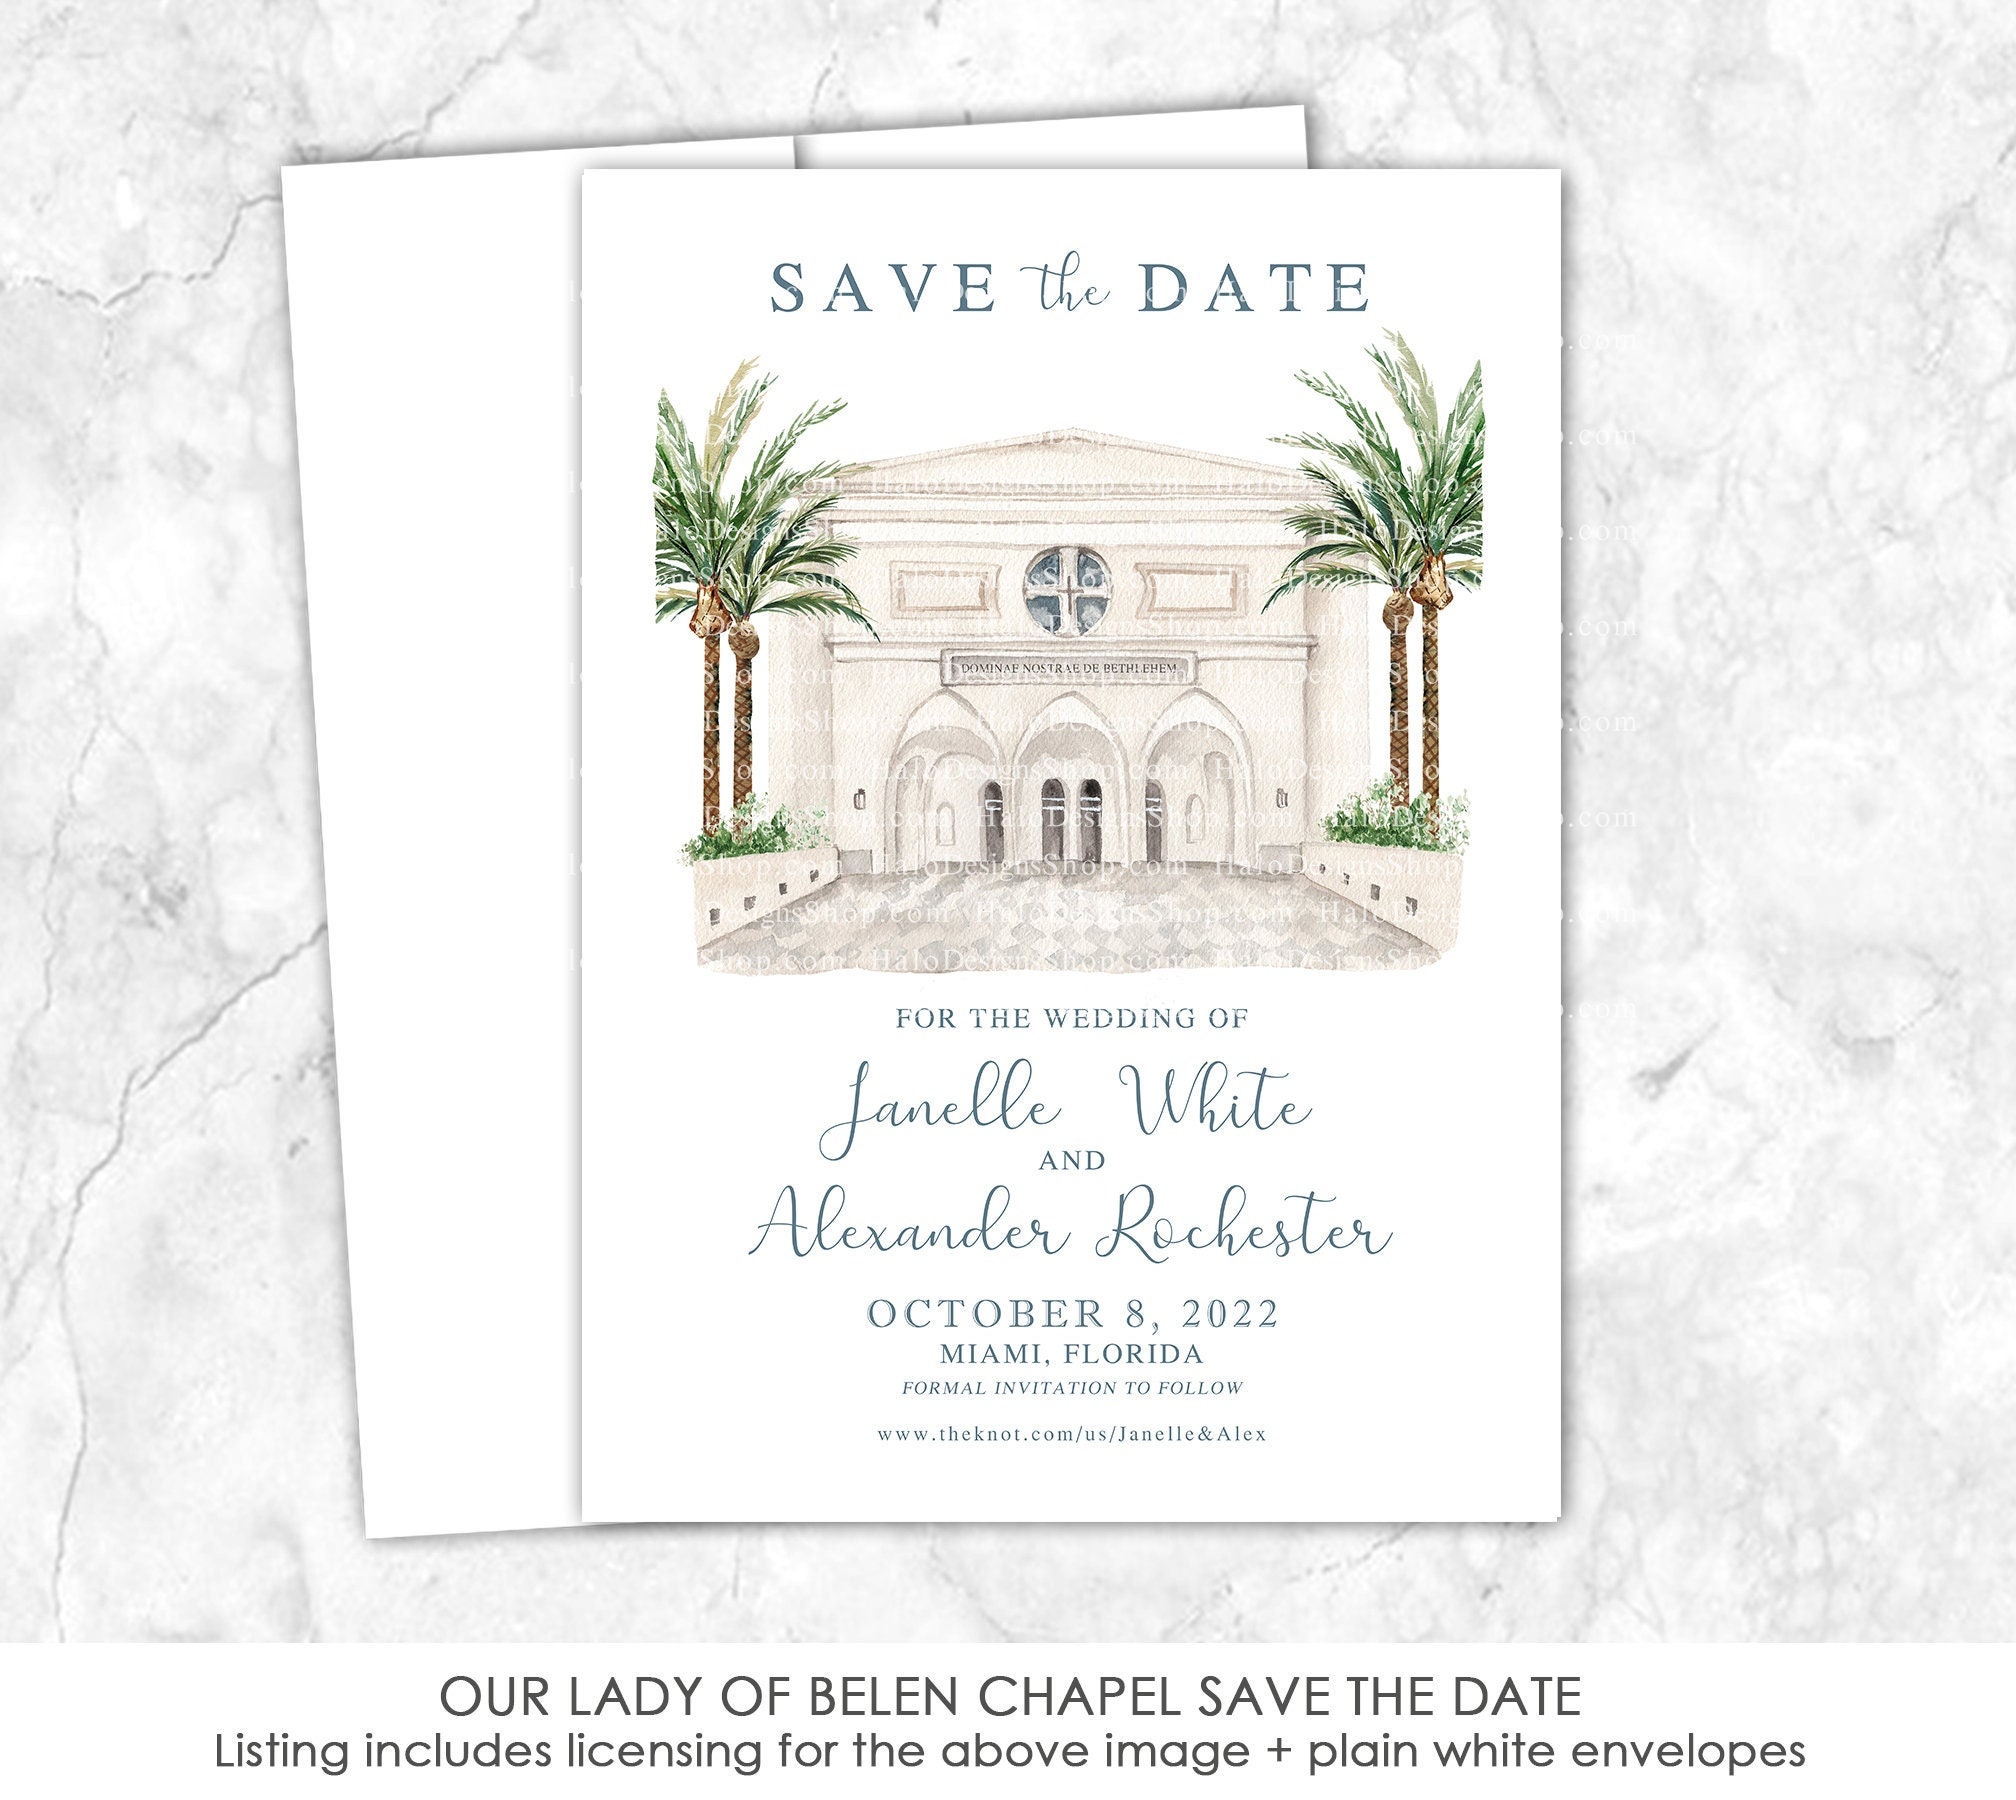 Our Lady of Belen Chapel Save the Date Miami Estate Venue photo picture